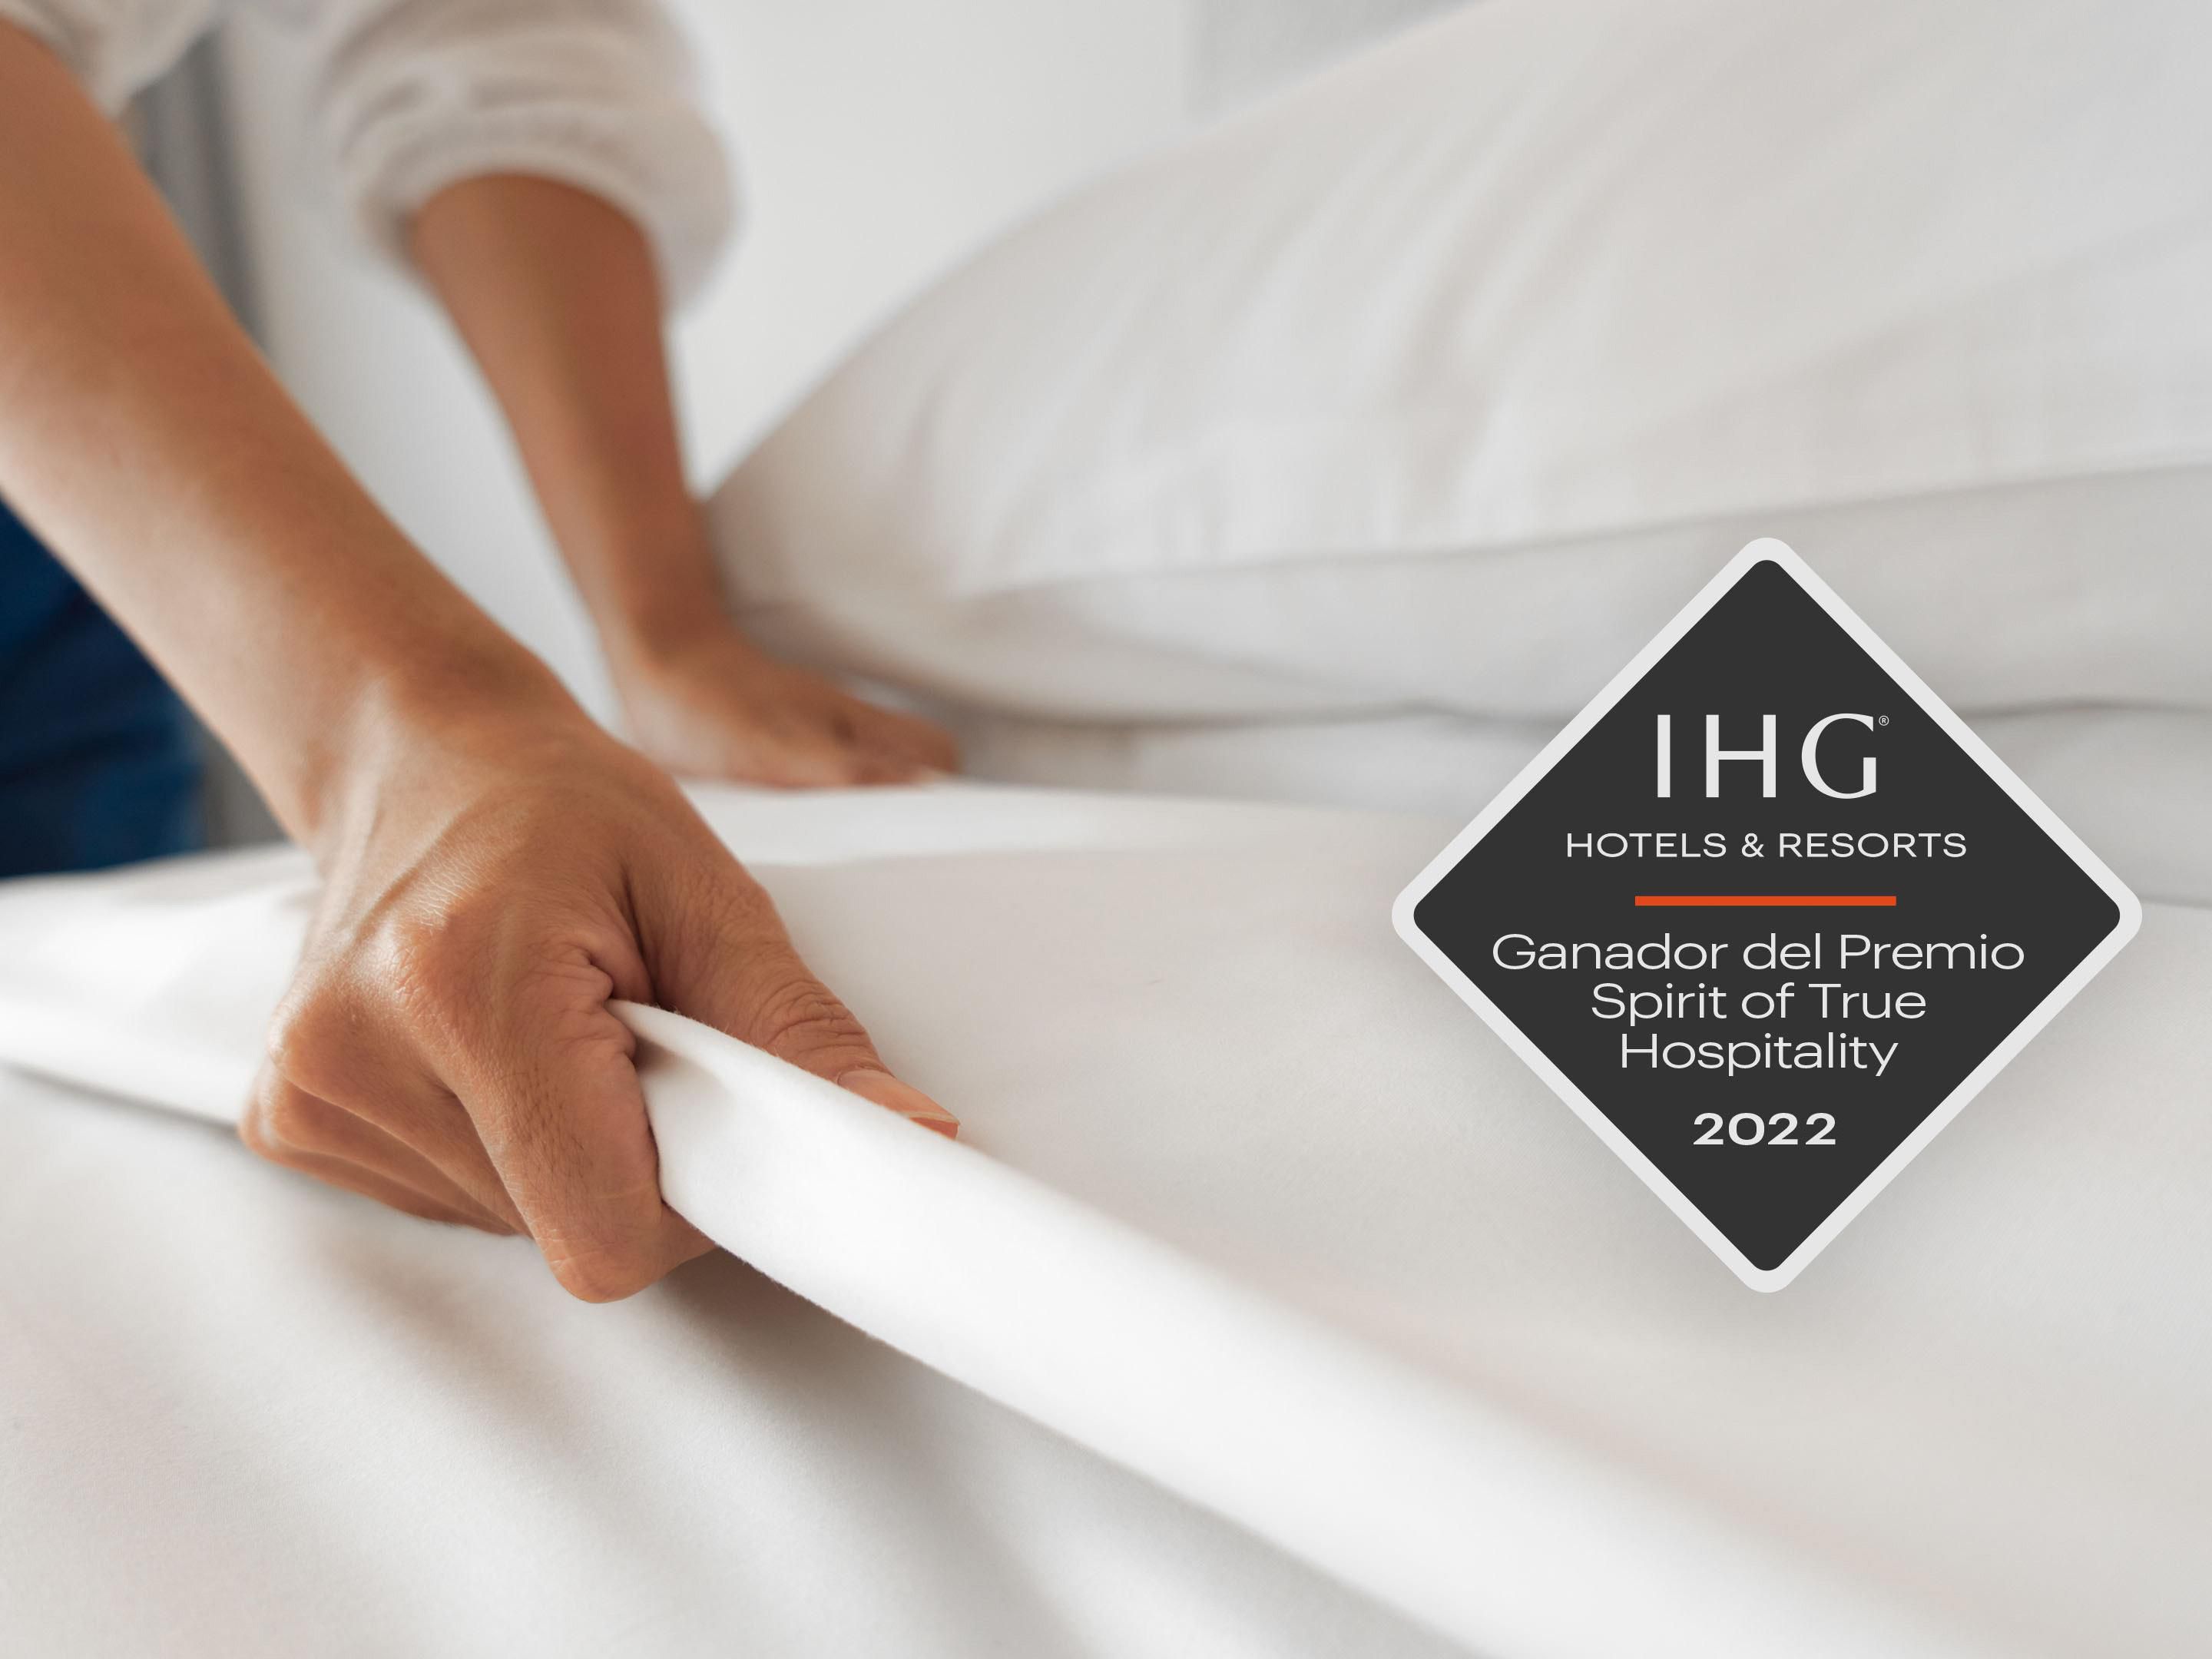 This hotel was recognized among the
4,000 IHG hotels in the Americas for their highest levels of excellence in quality, satisfaction and cleanliness.